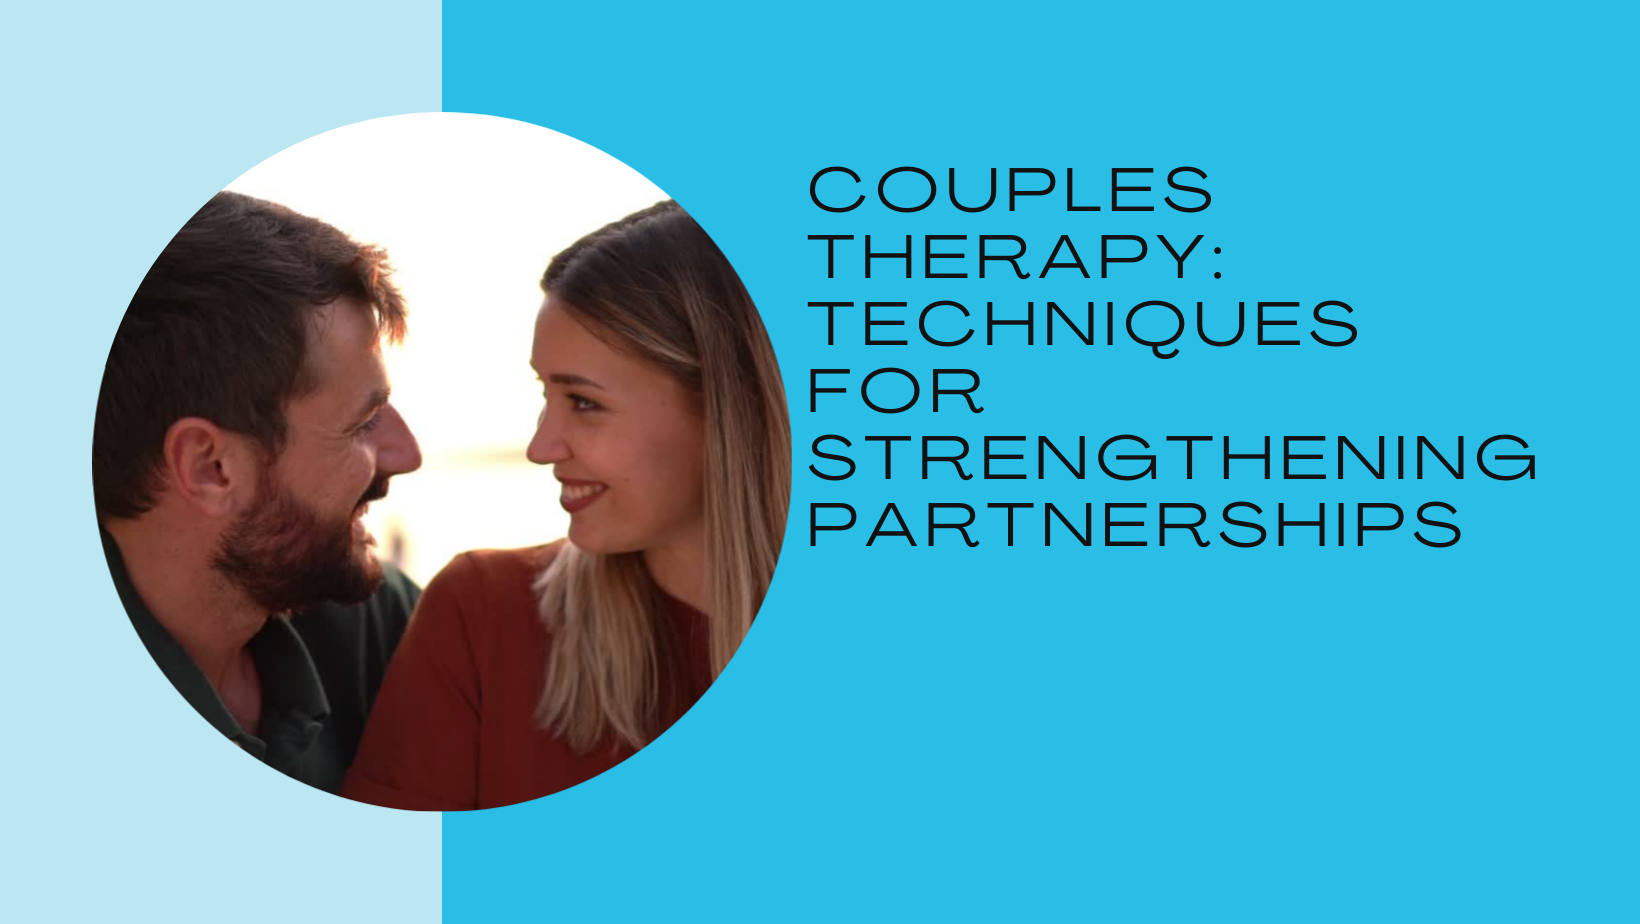 Couples Therapy: Techniques for Strengthening Partnerships